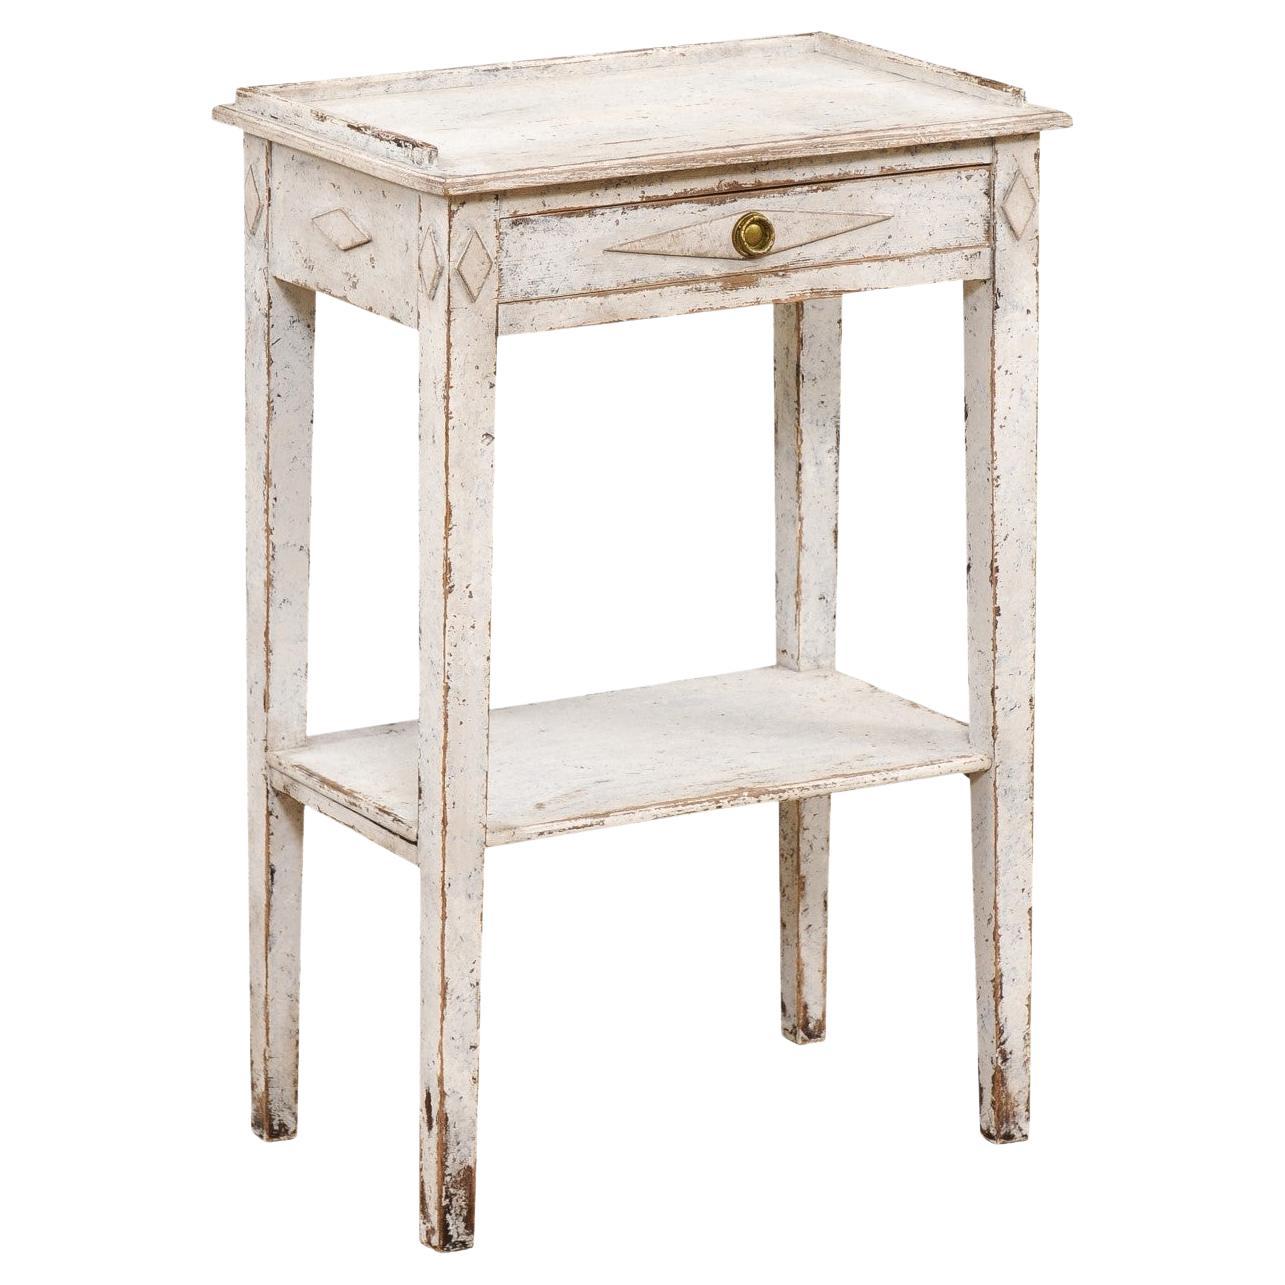 Swedish Gustavian Style 1880s Painted Lamp Table with Carved Diamond Motifs